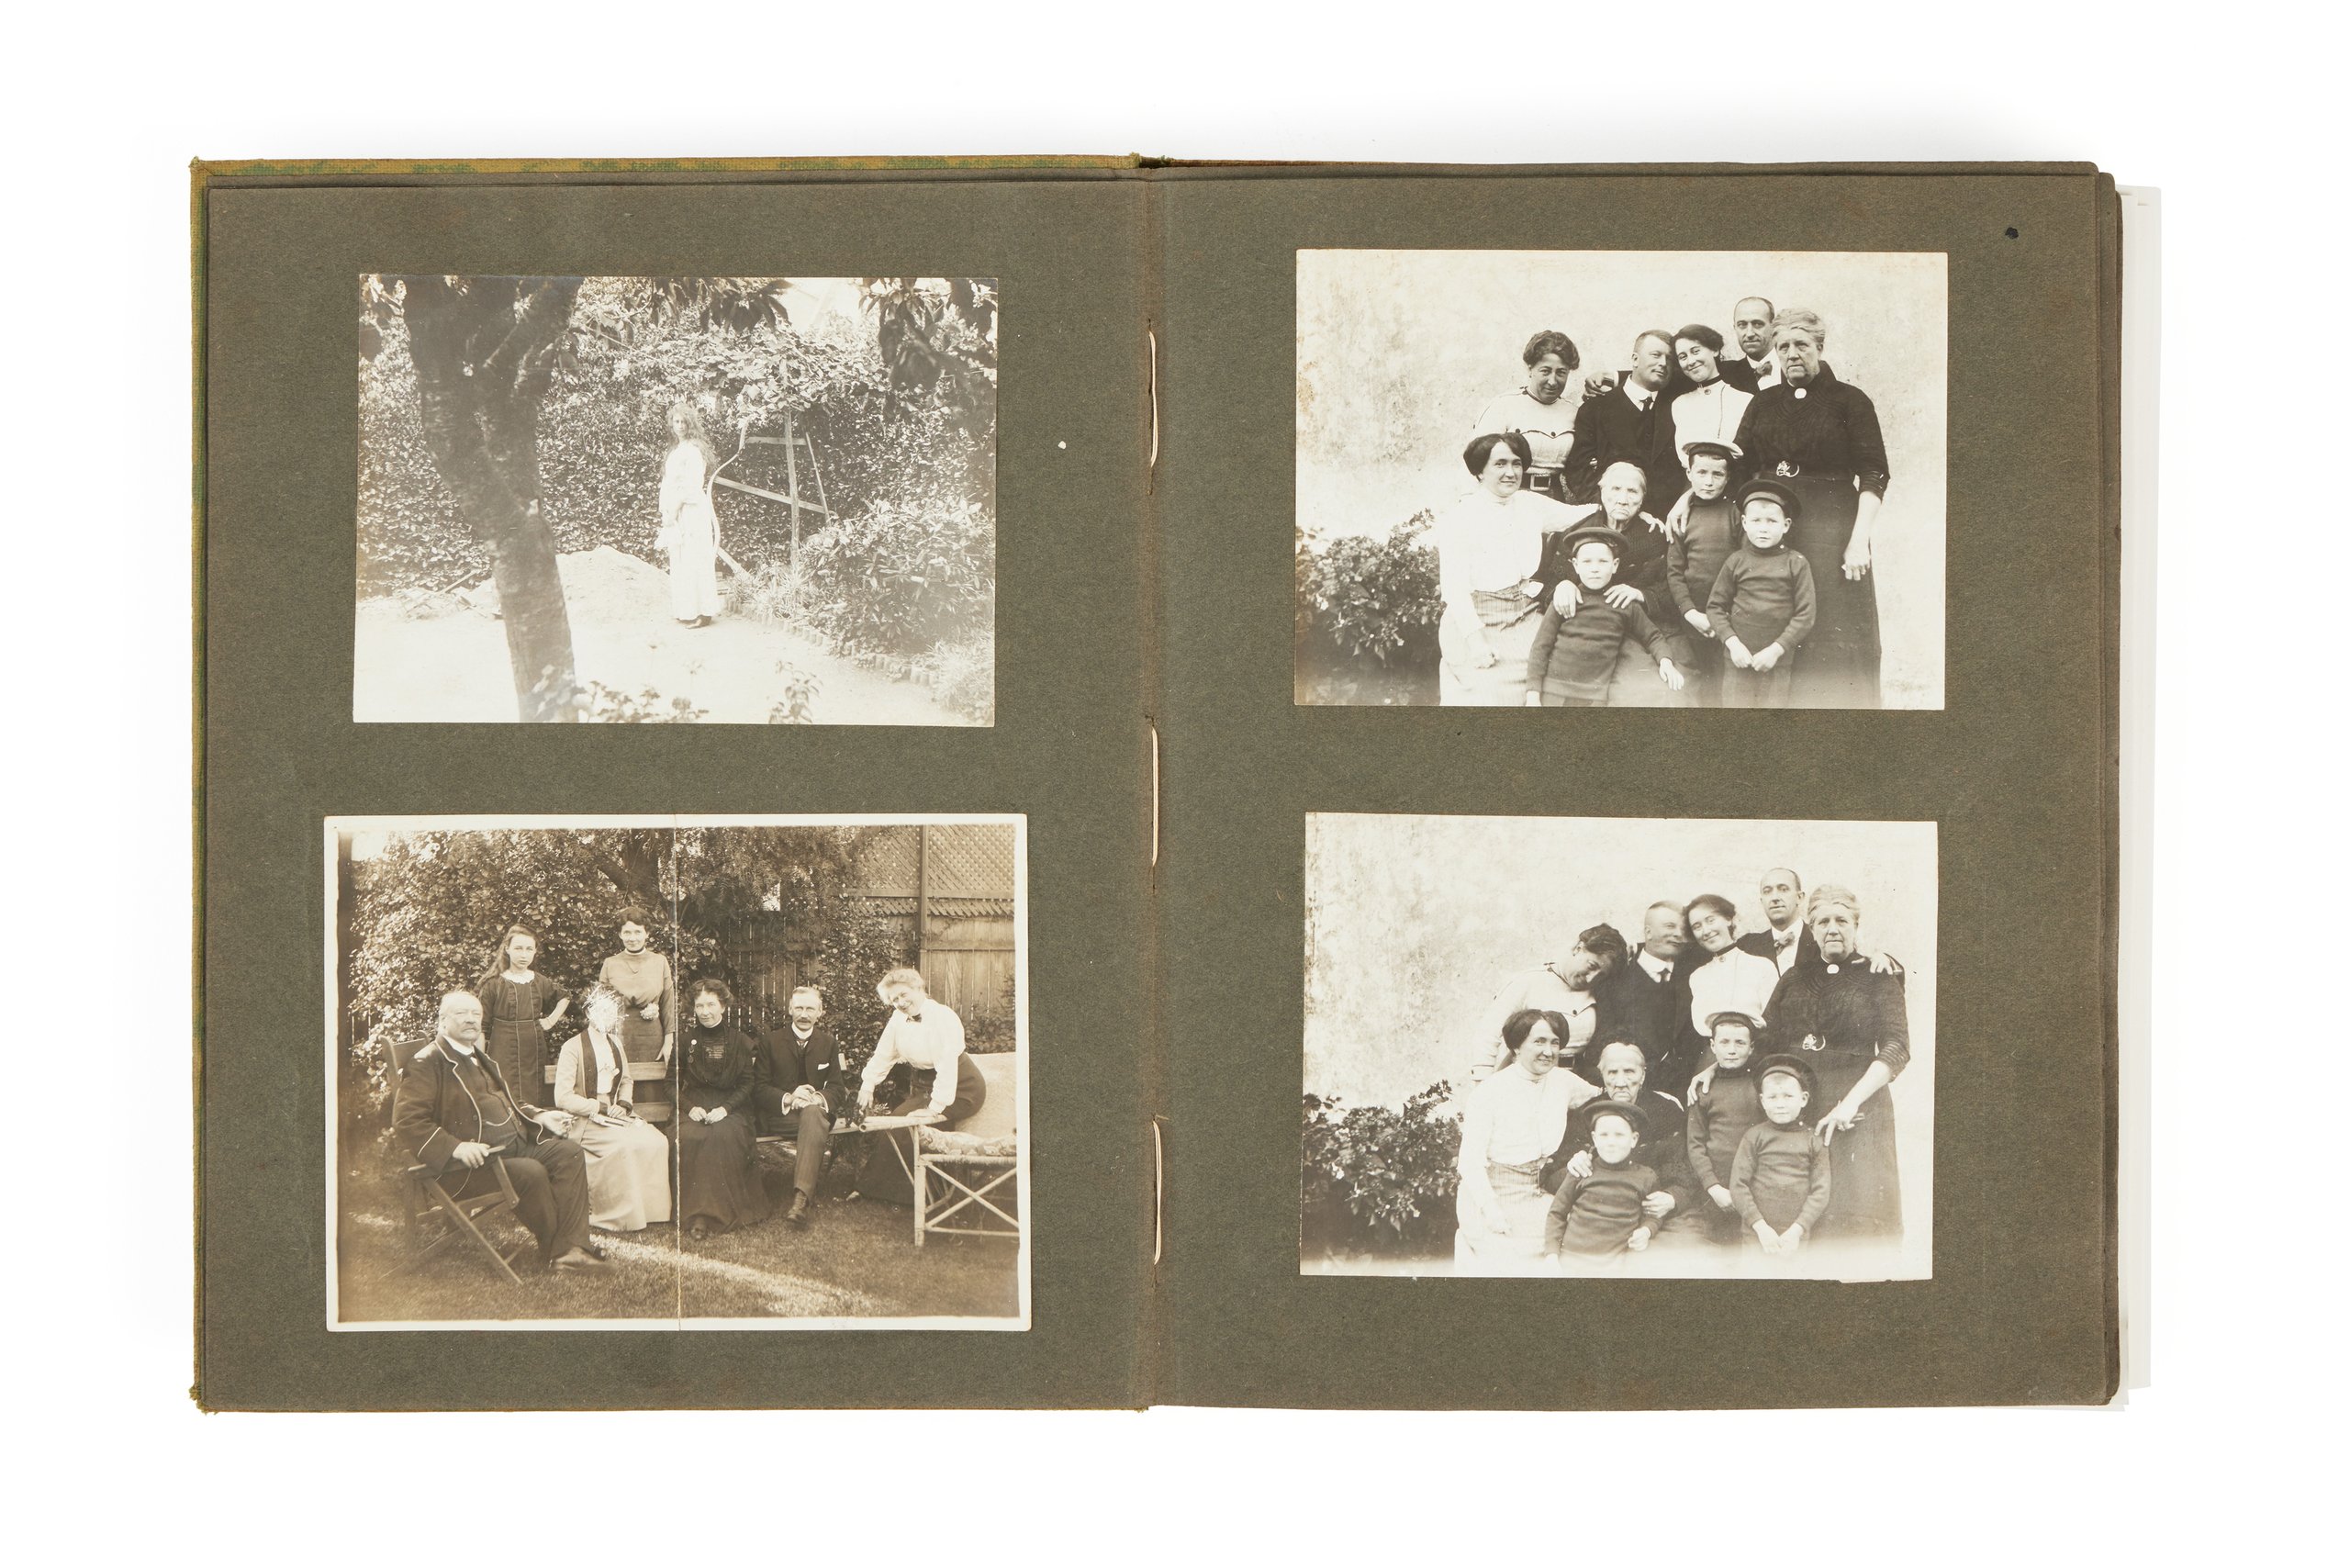 Collection of photographic material and newspaper clippings relating to Juliette Henry